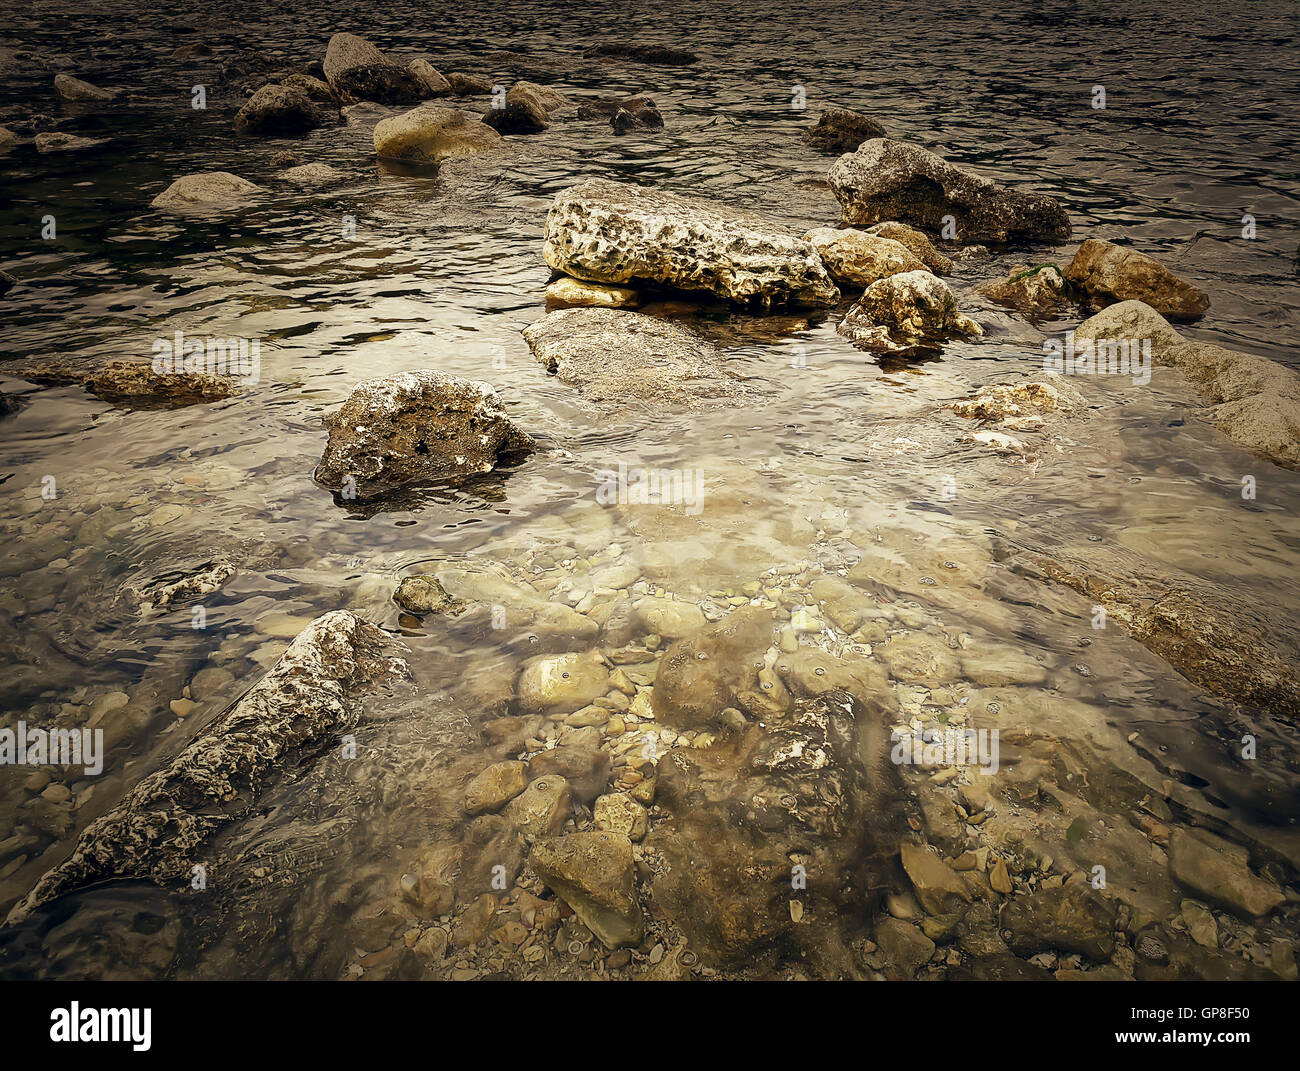 Underwater texture of a rocky seafloor with stone pieces Stock Photo